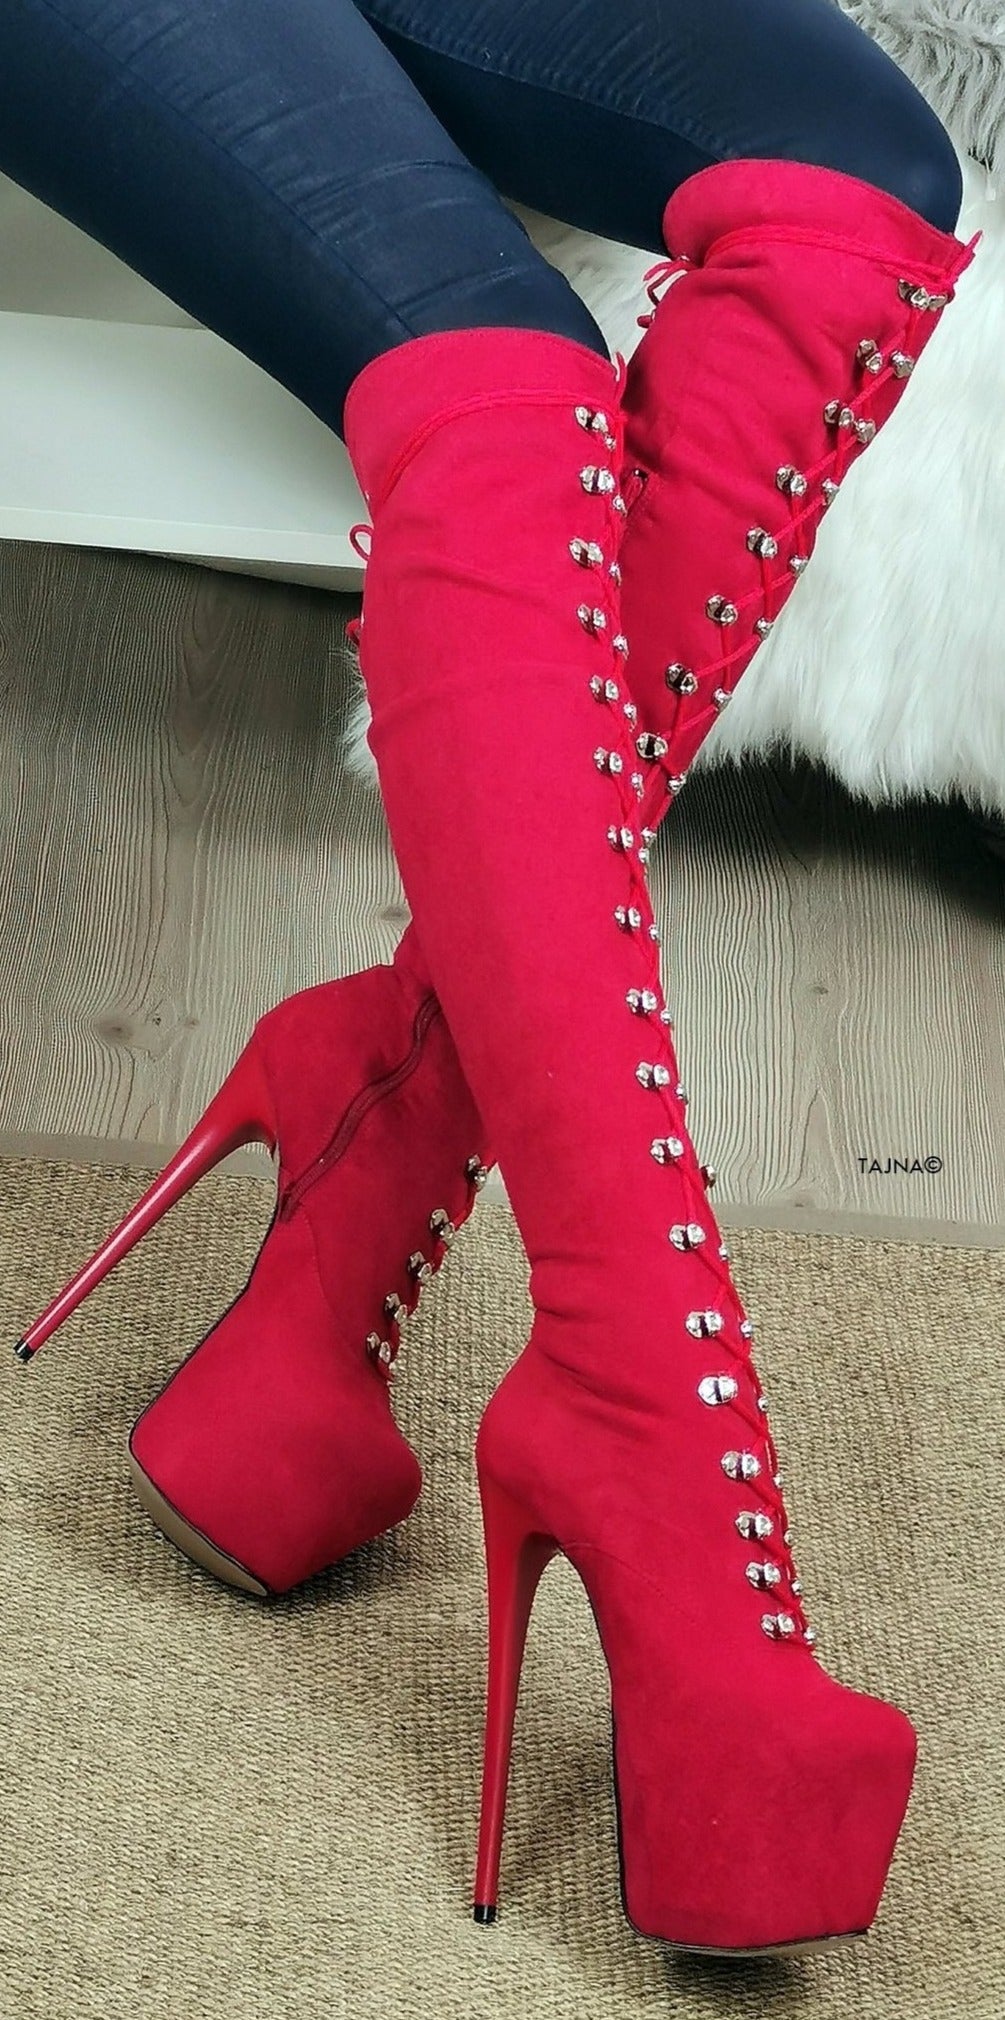 Red Suede Military High Heel Boots - Tajna Club